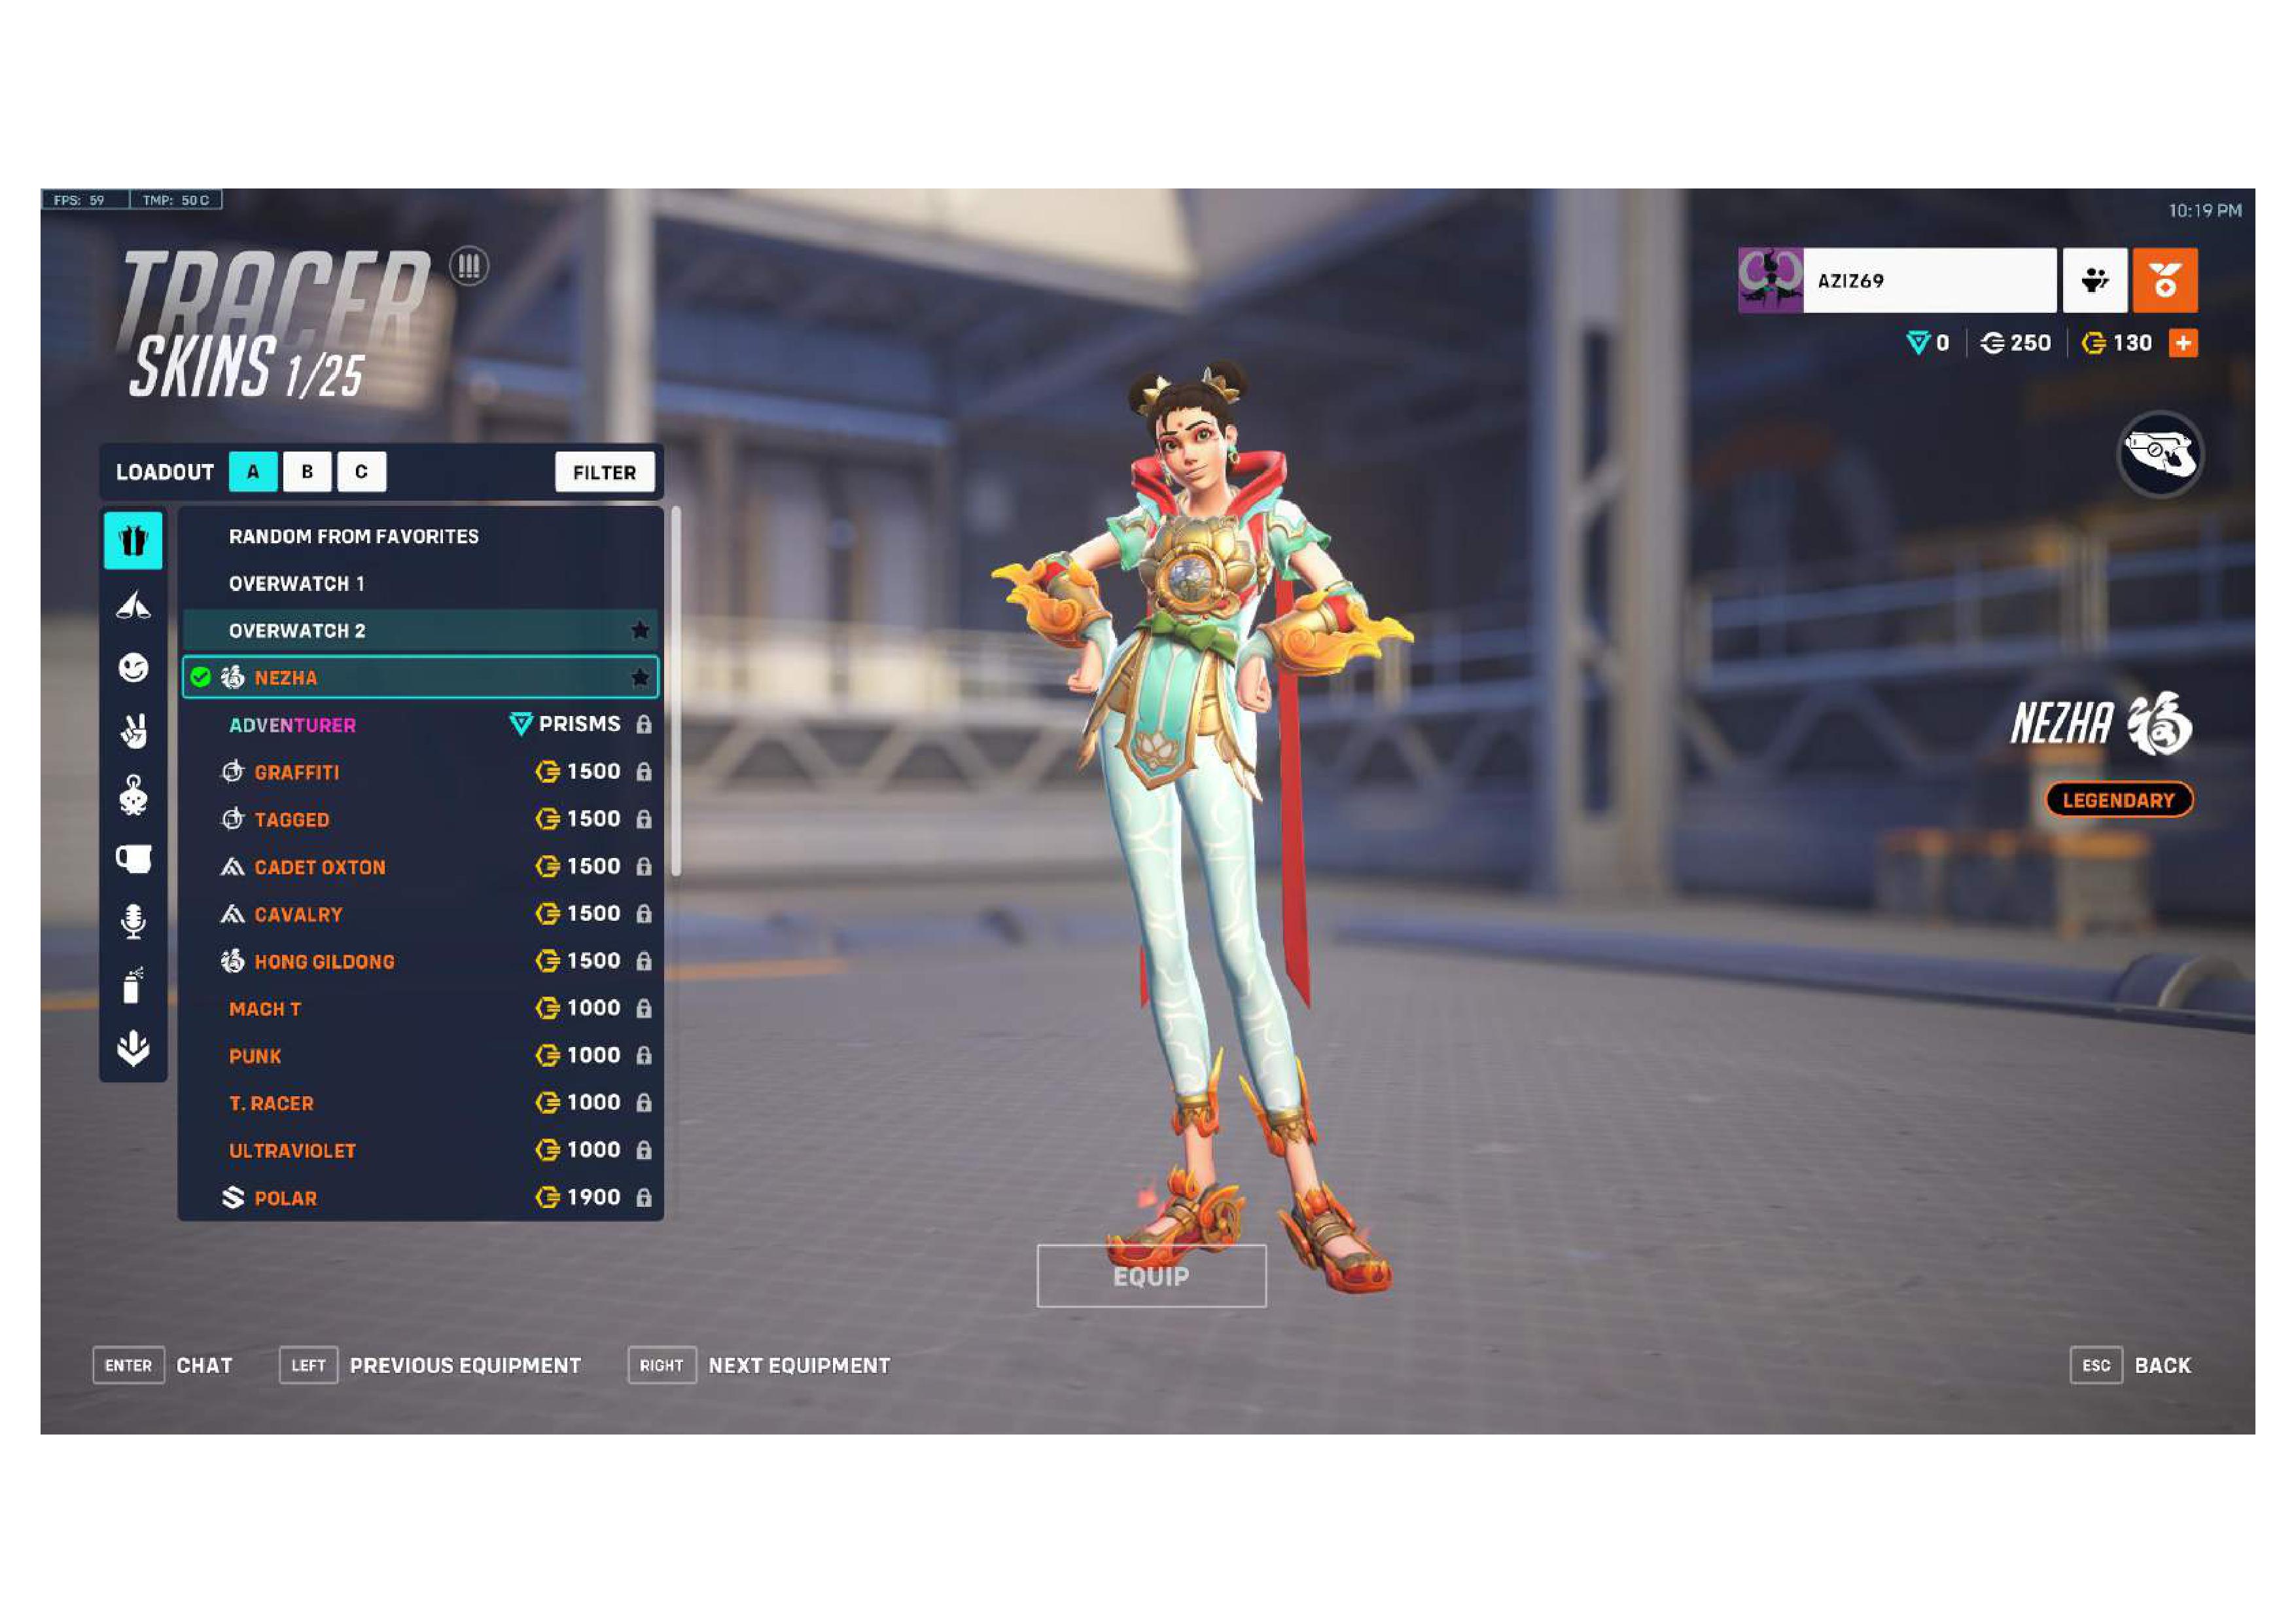 OVERWATCH 2| OW2  ACCOUNT RANKED | Support  plat5- dps  gold 3|  ALL HEROS UNLOCKED | + 1 Legendary Skin + 2 Epic skins  |- PC/XBOX/PS-| 